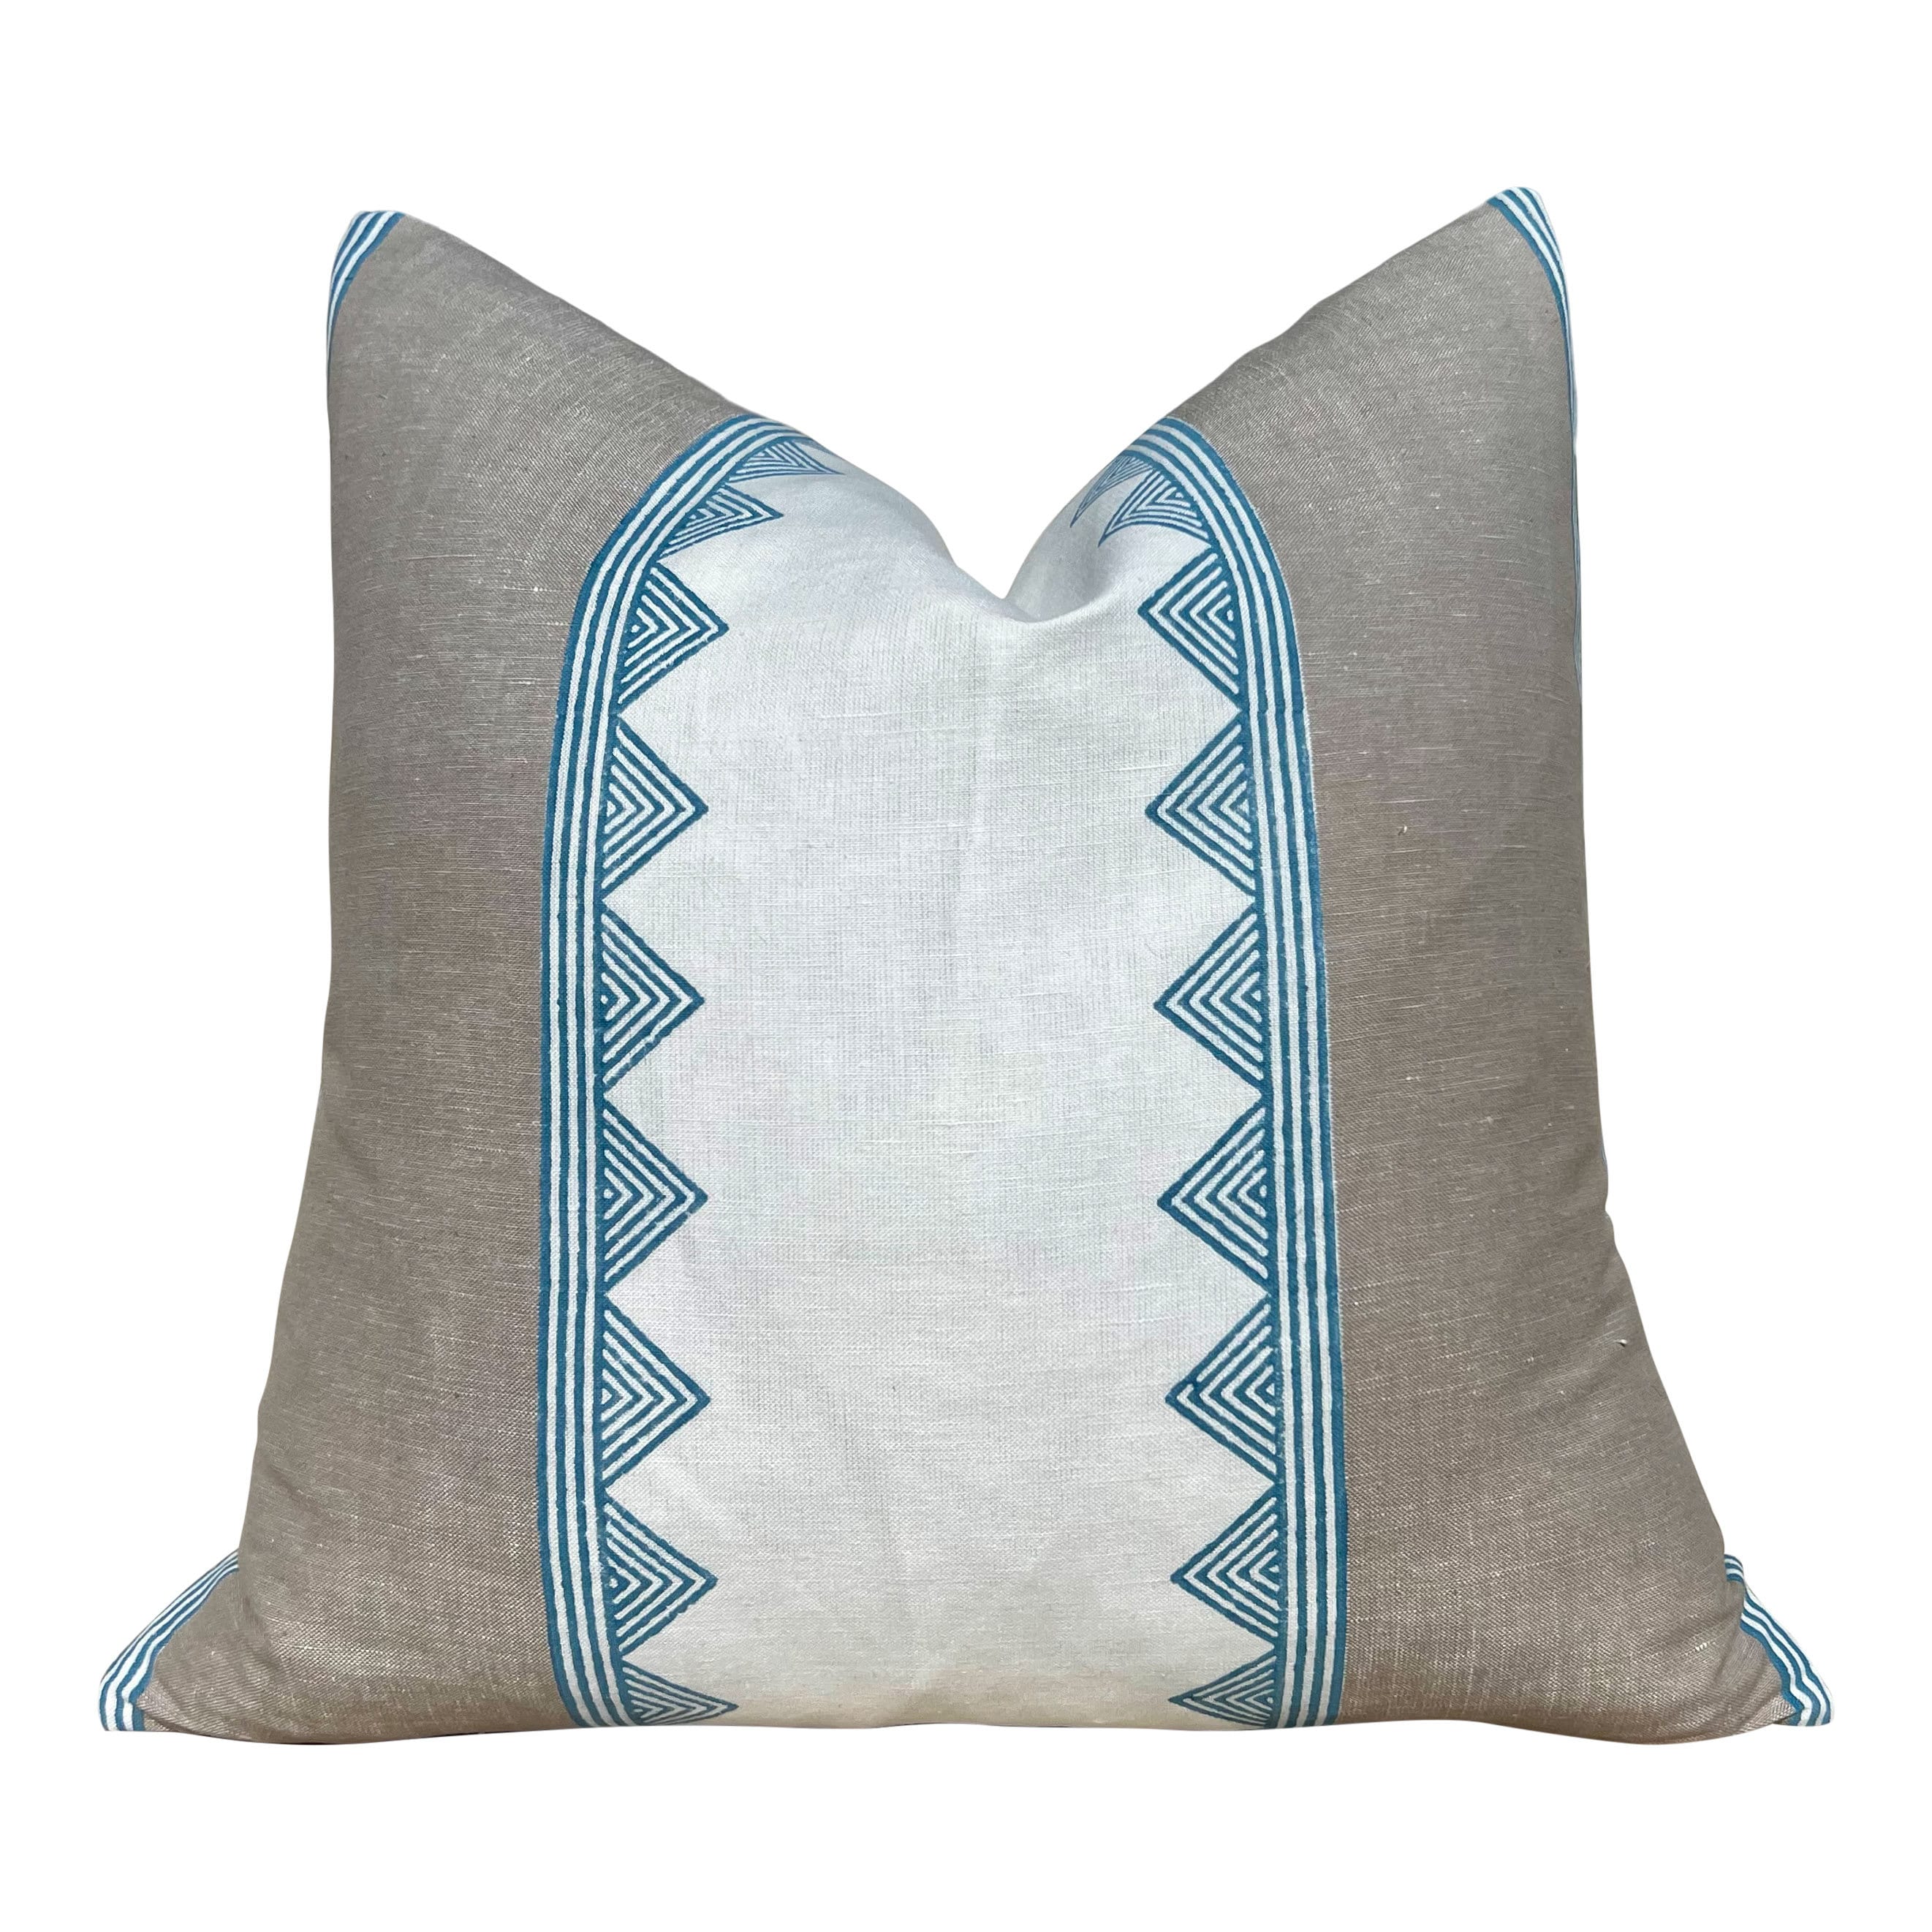 Thibaut Kismet Striped Pillow in French Blue. Lumbar Striped Accent Pillow Cover, Decorative Pillow Sham, Designer Pillows, Accent Pillow